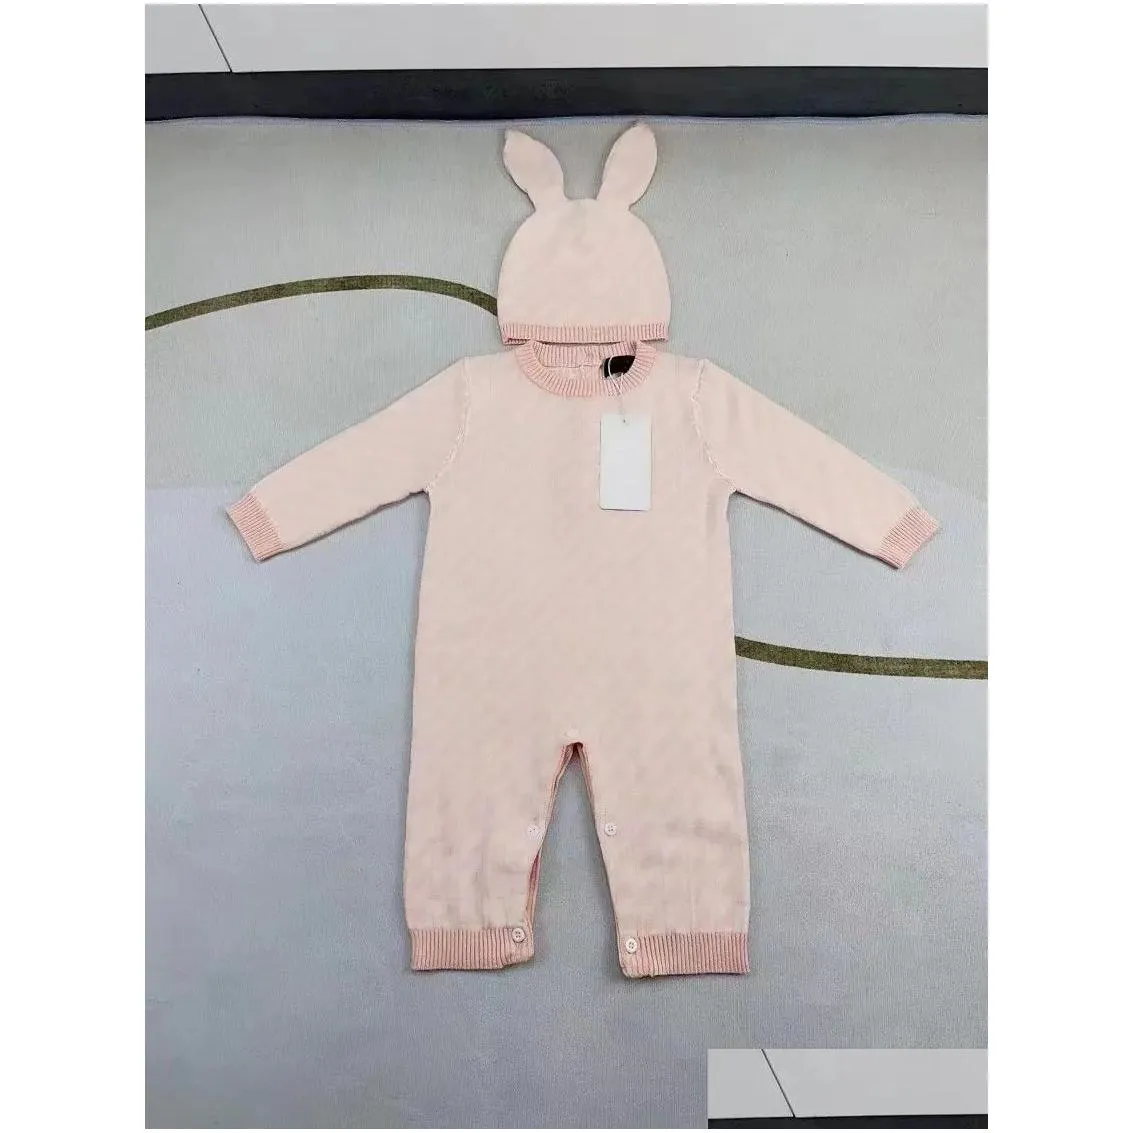 luxury newborn letter knitting rompers suits babies sleeping wear jumpsuit soft warm knitted bedding blankets hat bibs 4pcs infant clothing gift outfit